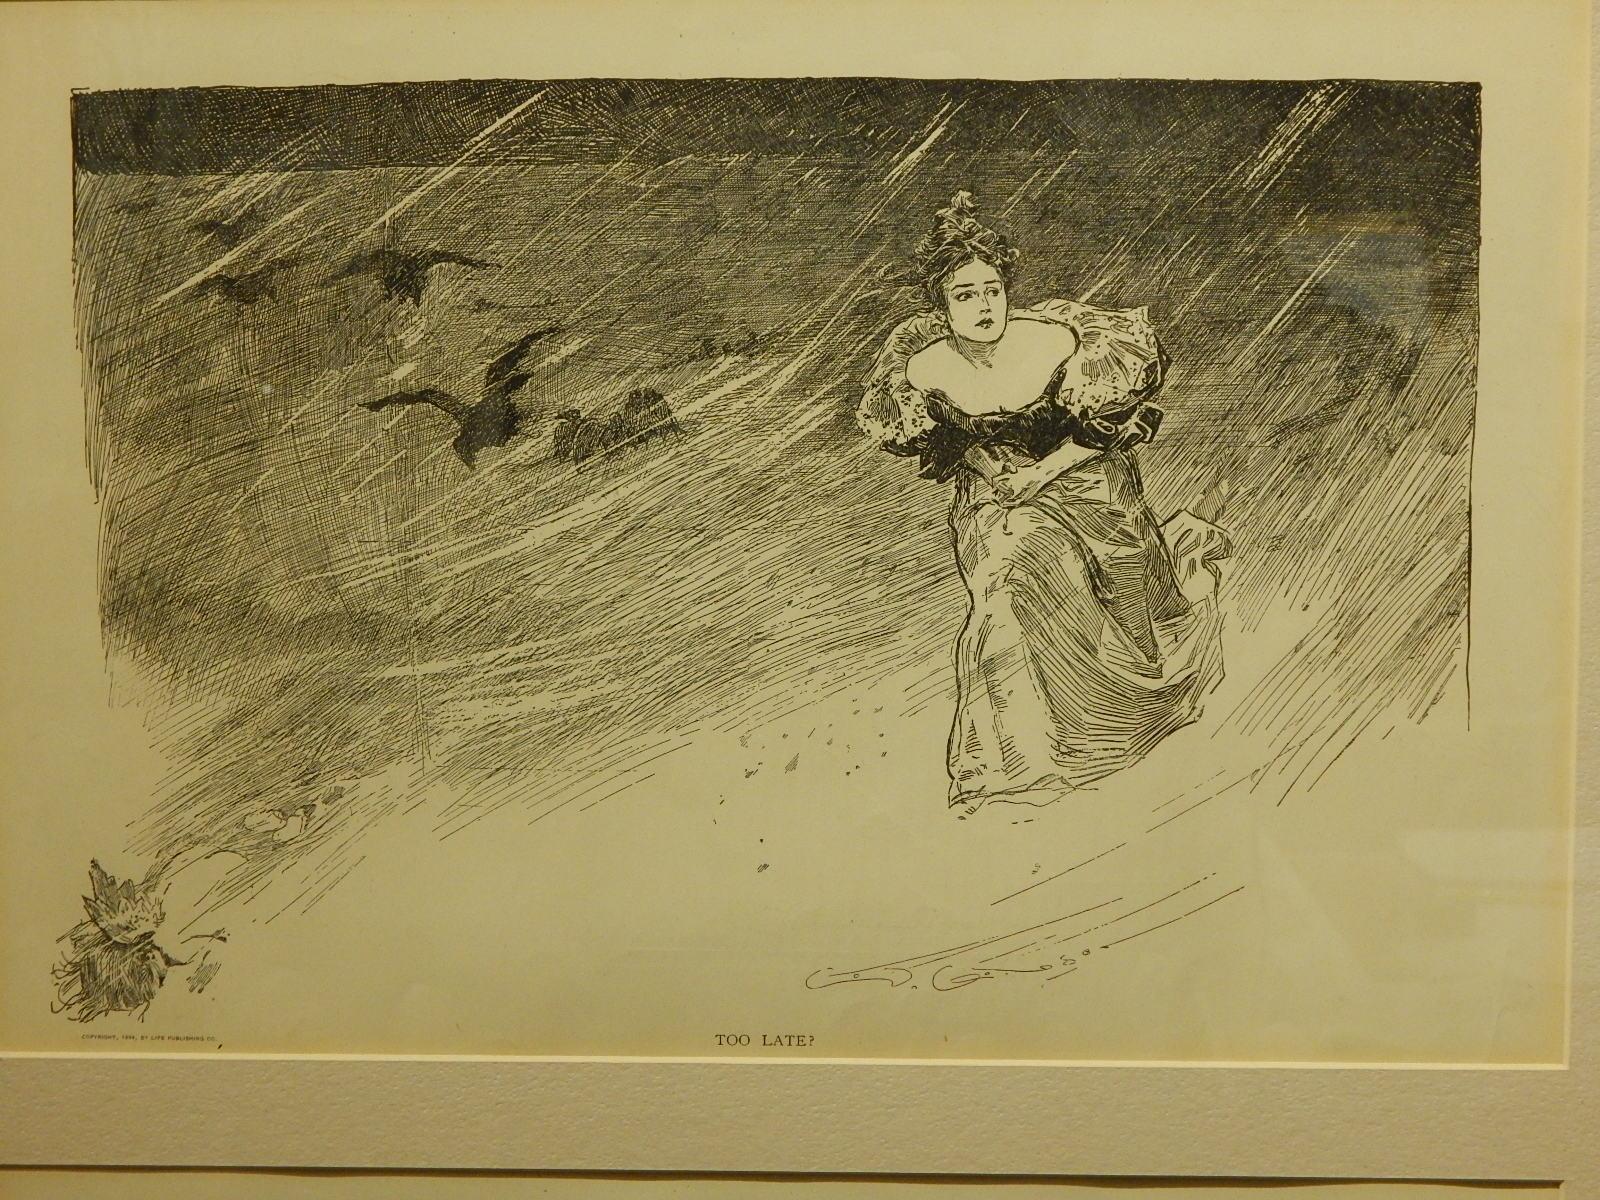 Charles Dana Gibson: Too Late! And That Restless Sea